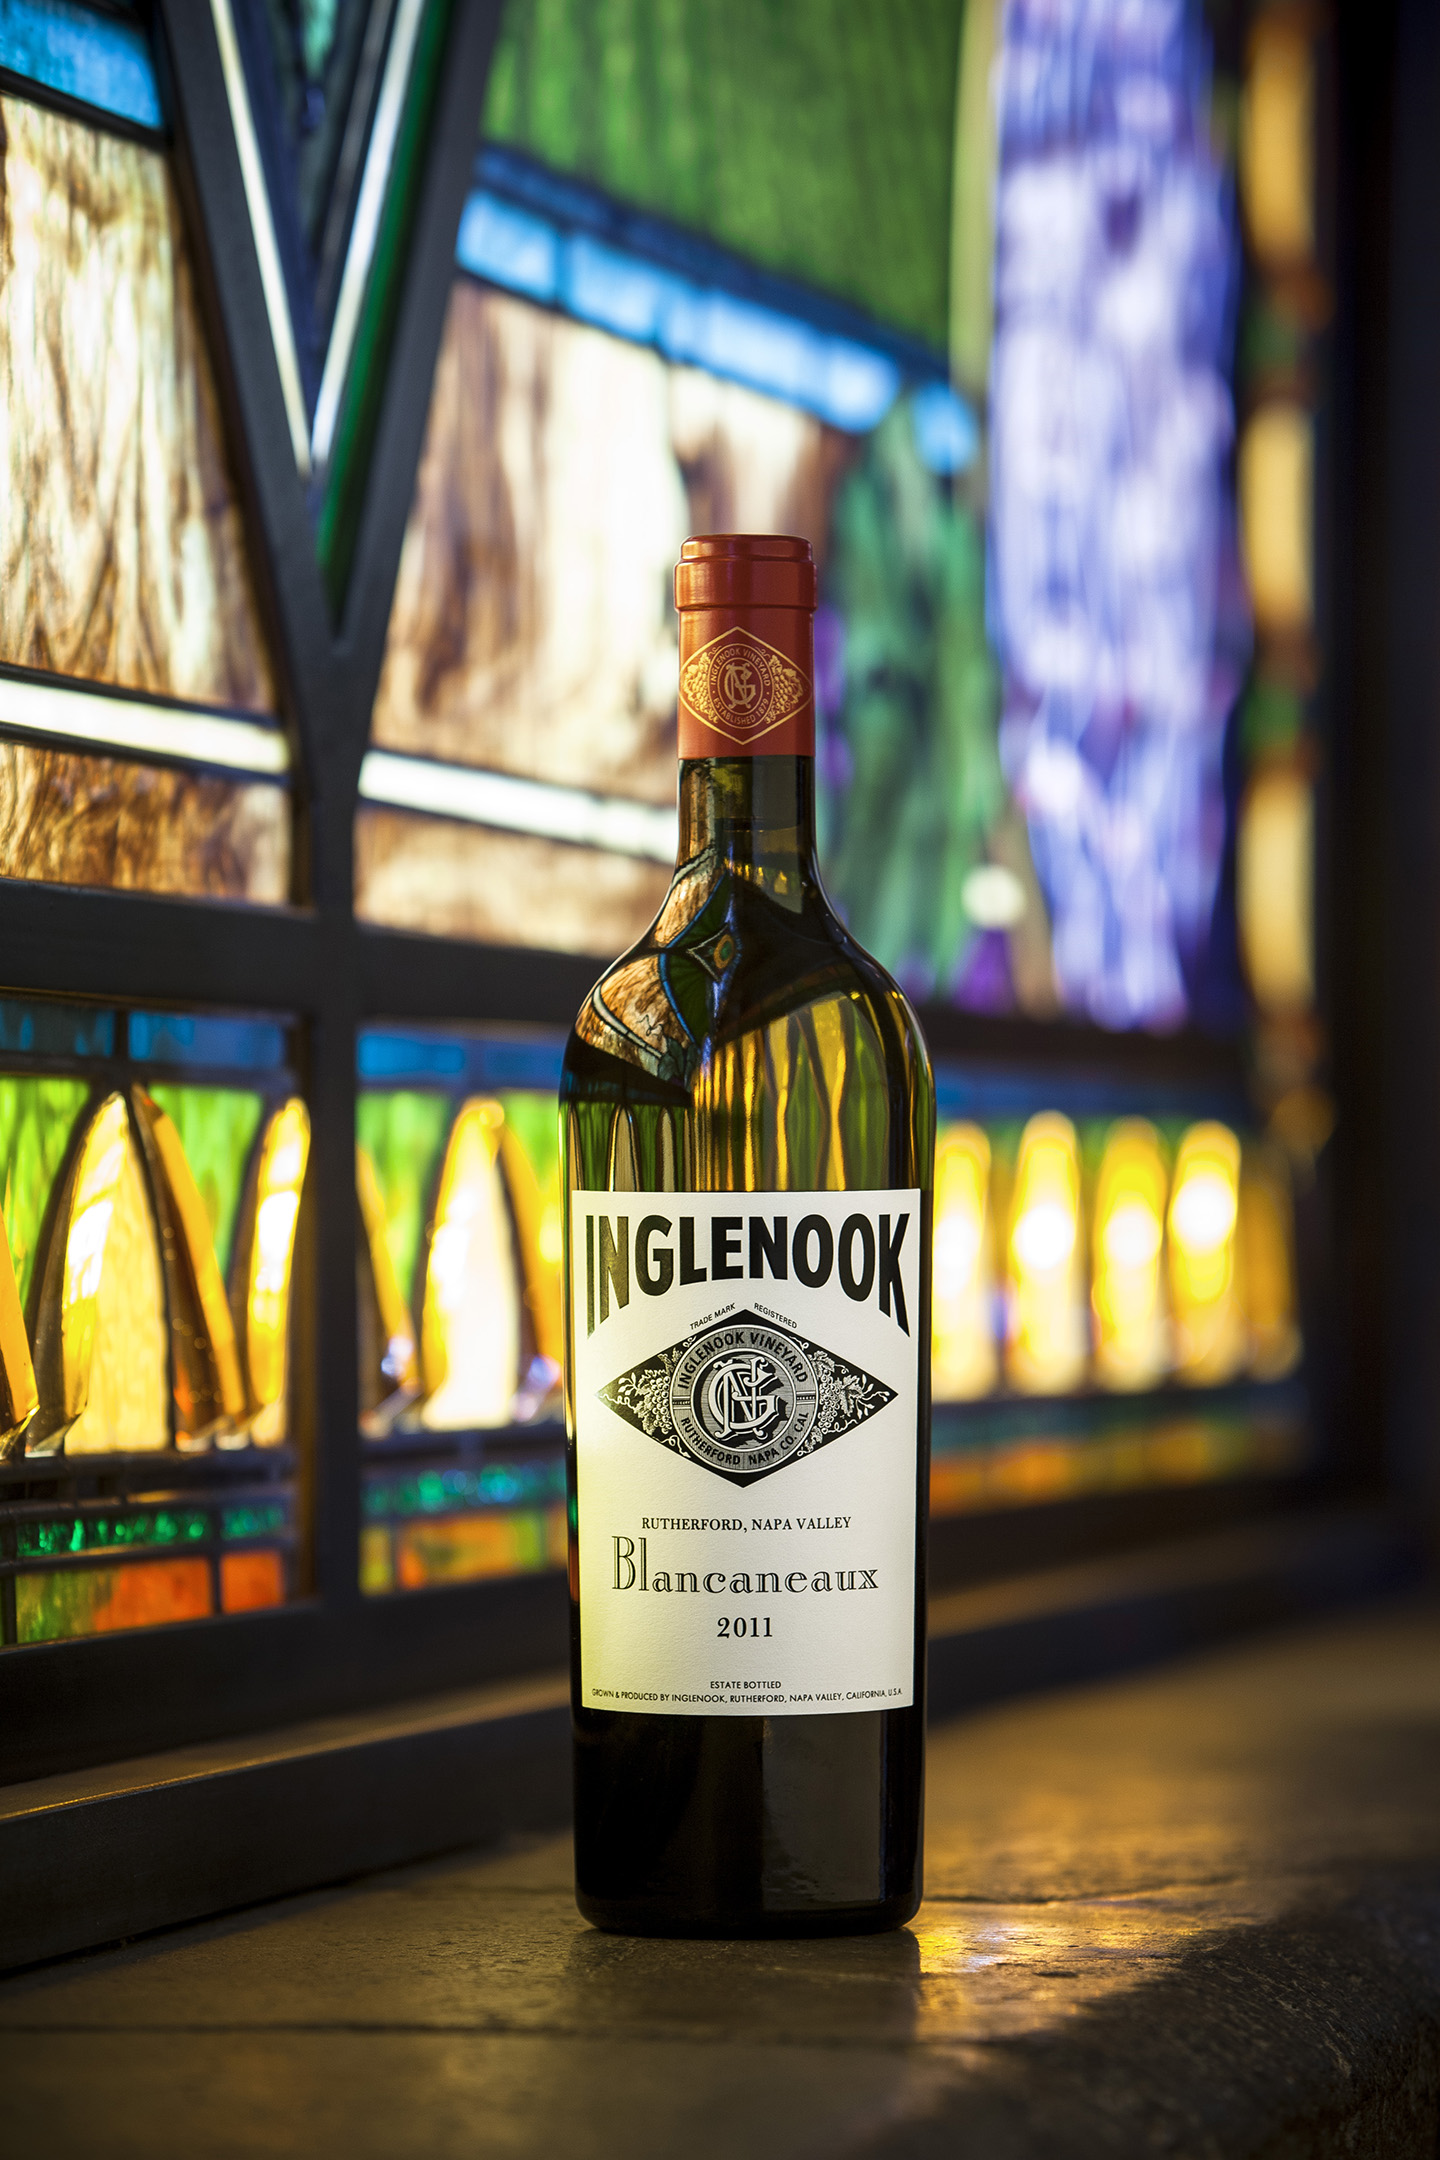 Bottle of Blancaneaux in front of a stained glass window.